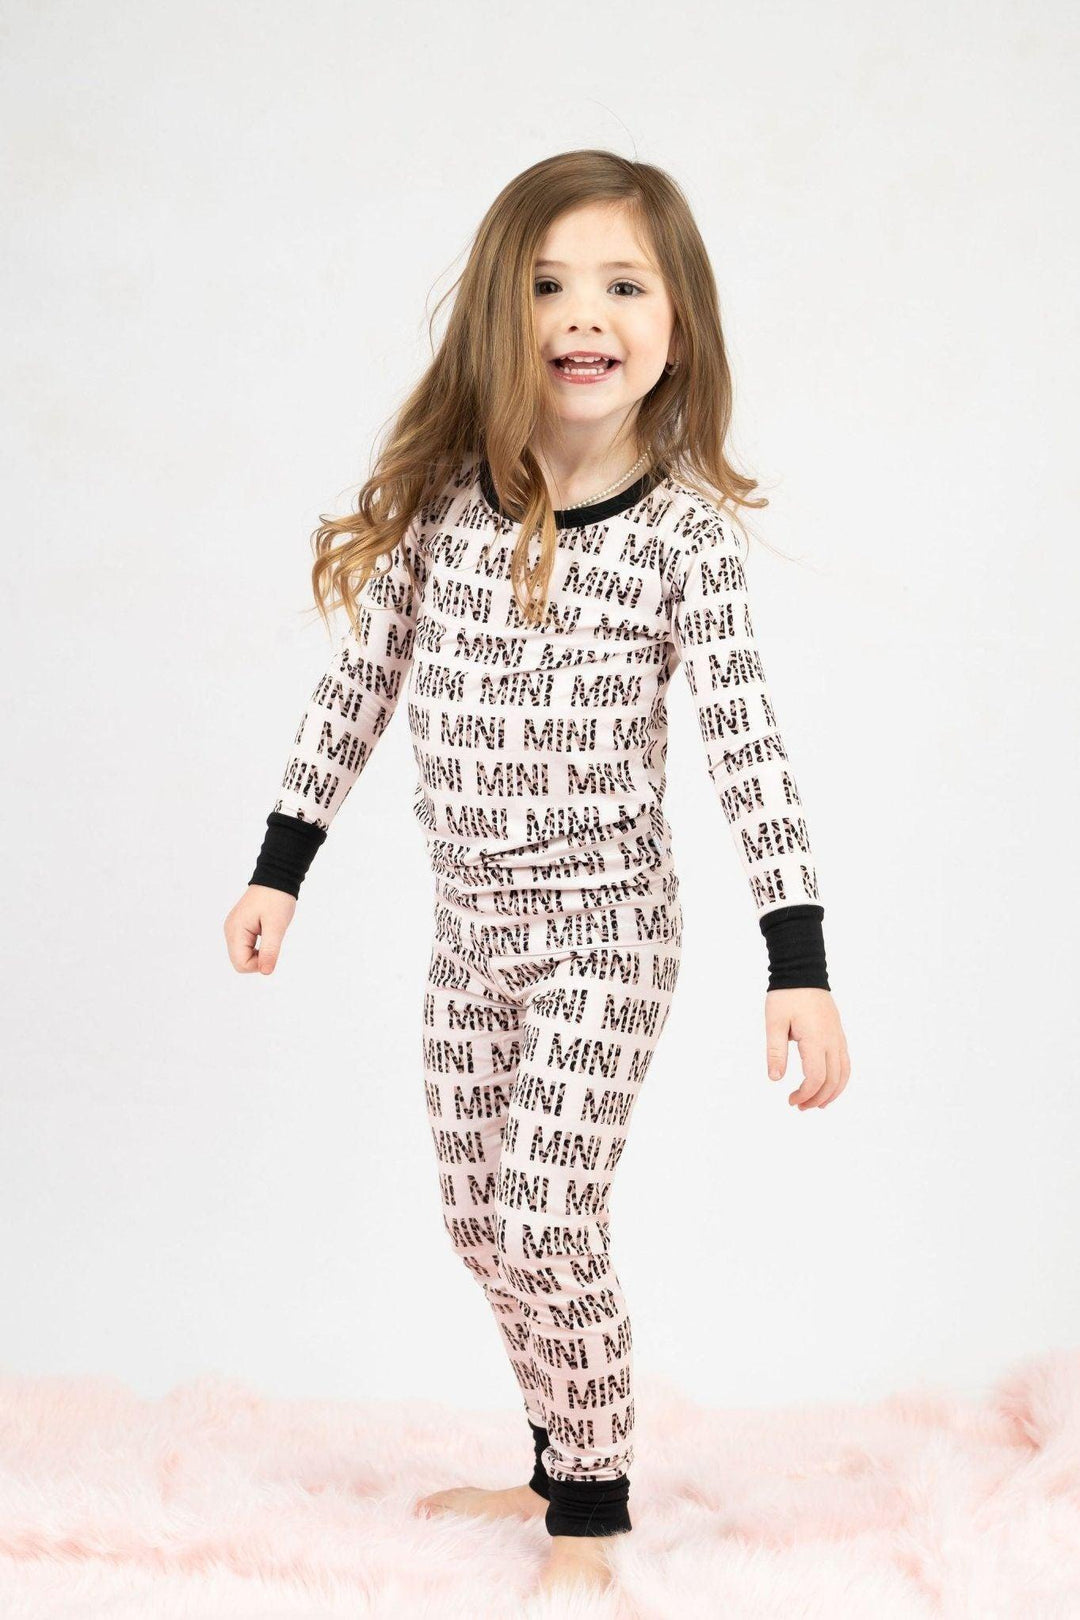 A young girl with long brown hair, smiling and walking towards the camera, wearing our bamboo two-piece pajama set with the words "mini" written in leopard print, against a white background.